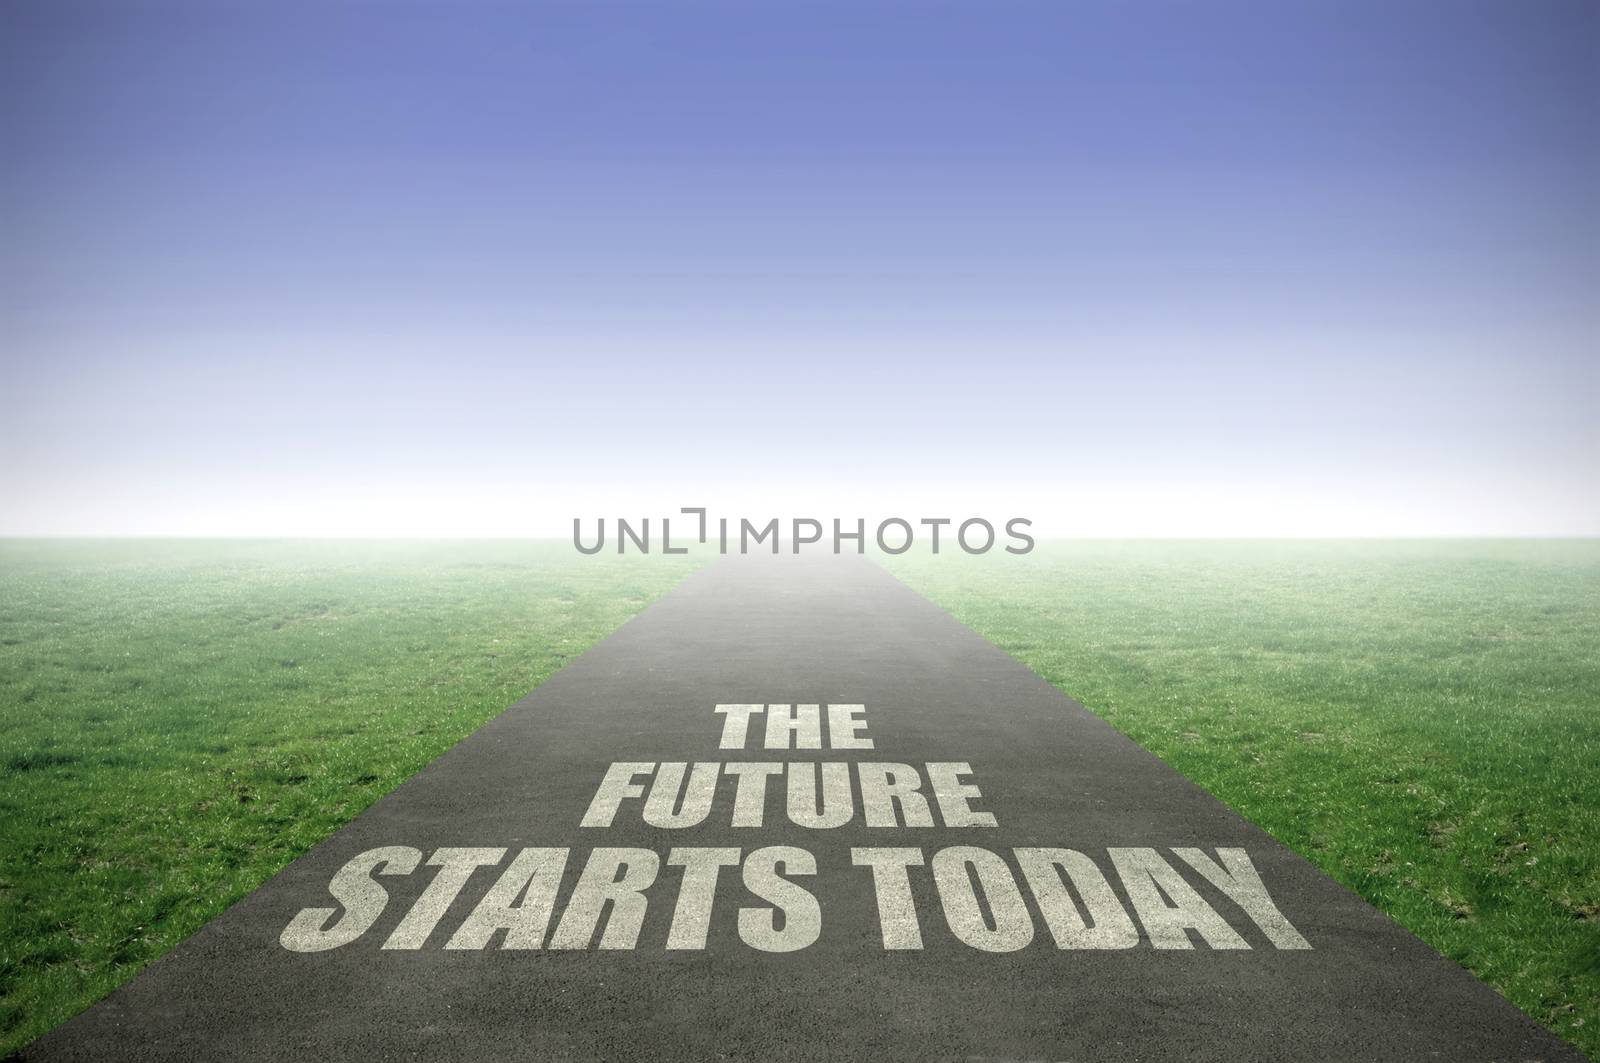 The future starts today painted on an open road leading out to the horizon